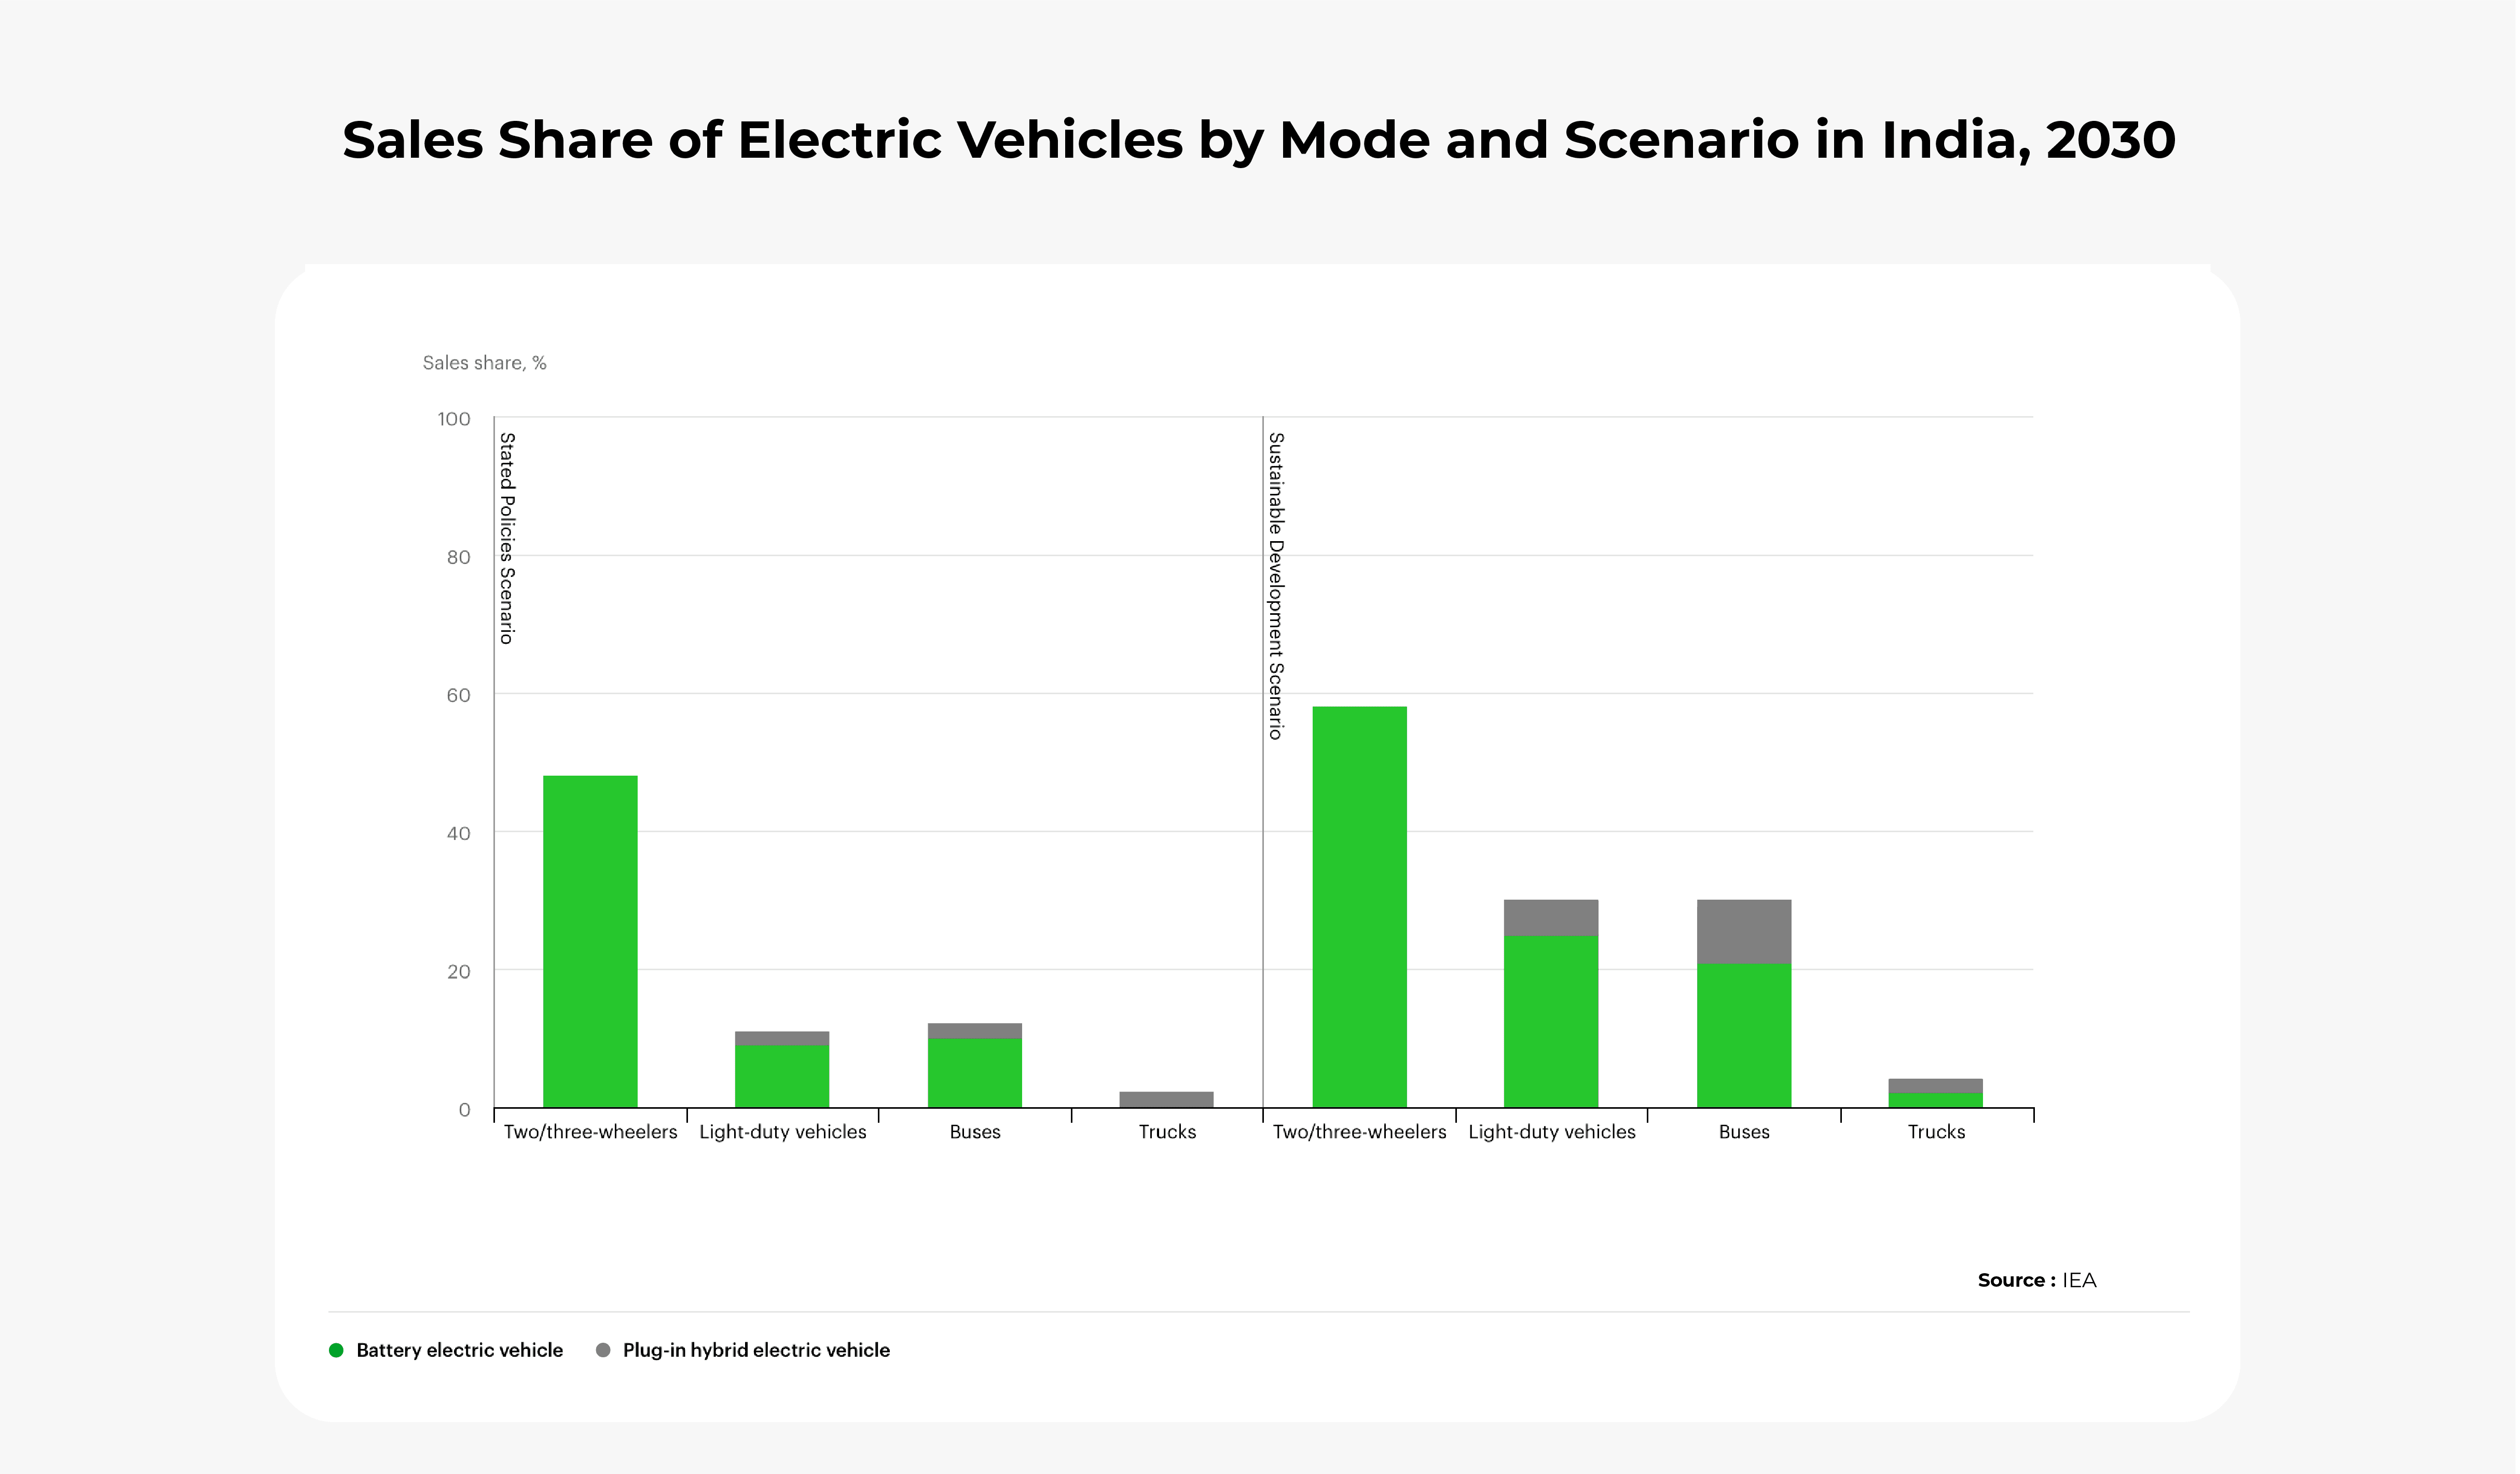 Sales share of electric vehicles by mode and scenario in India, 2030